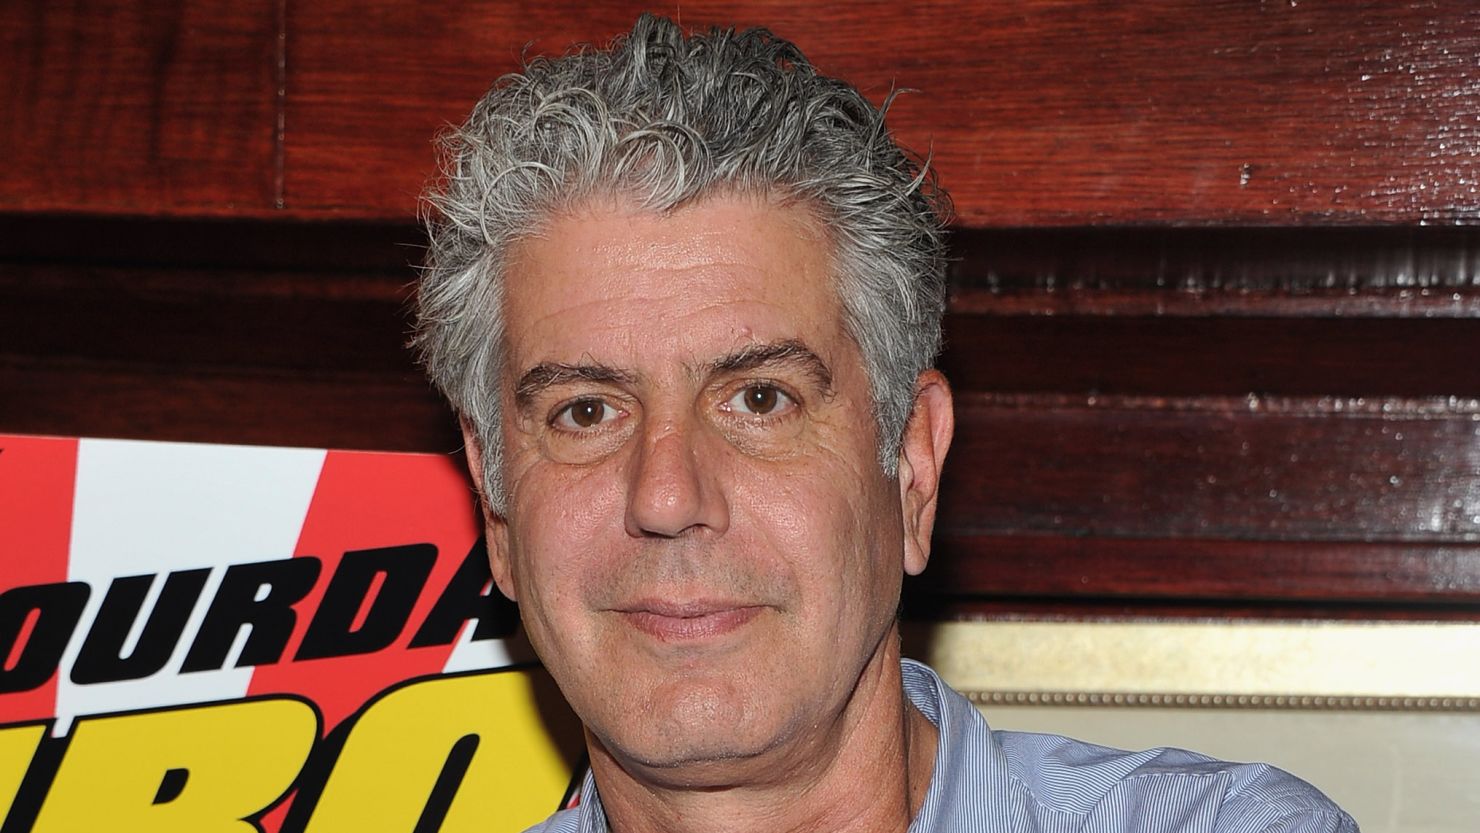 Anthony Bourdain had a rare (for him), idyllic summer, replete with pool floaties, corn-on-the-cob and lobster dinners.